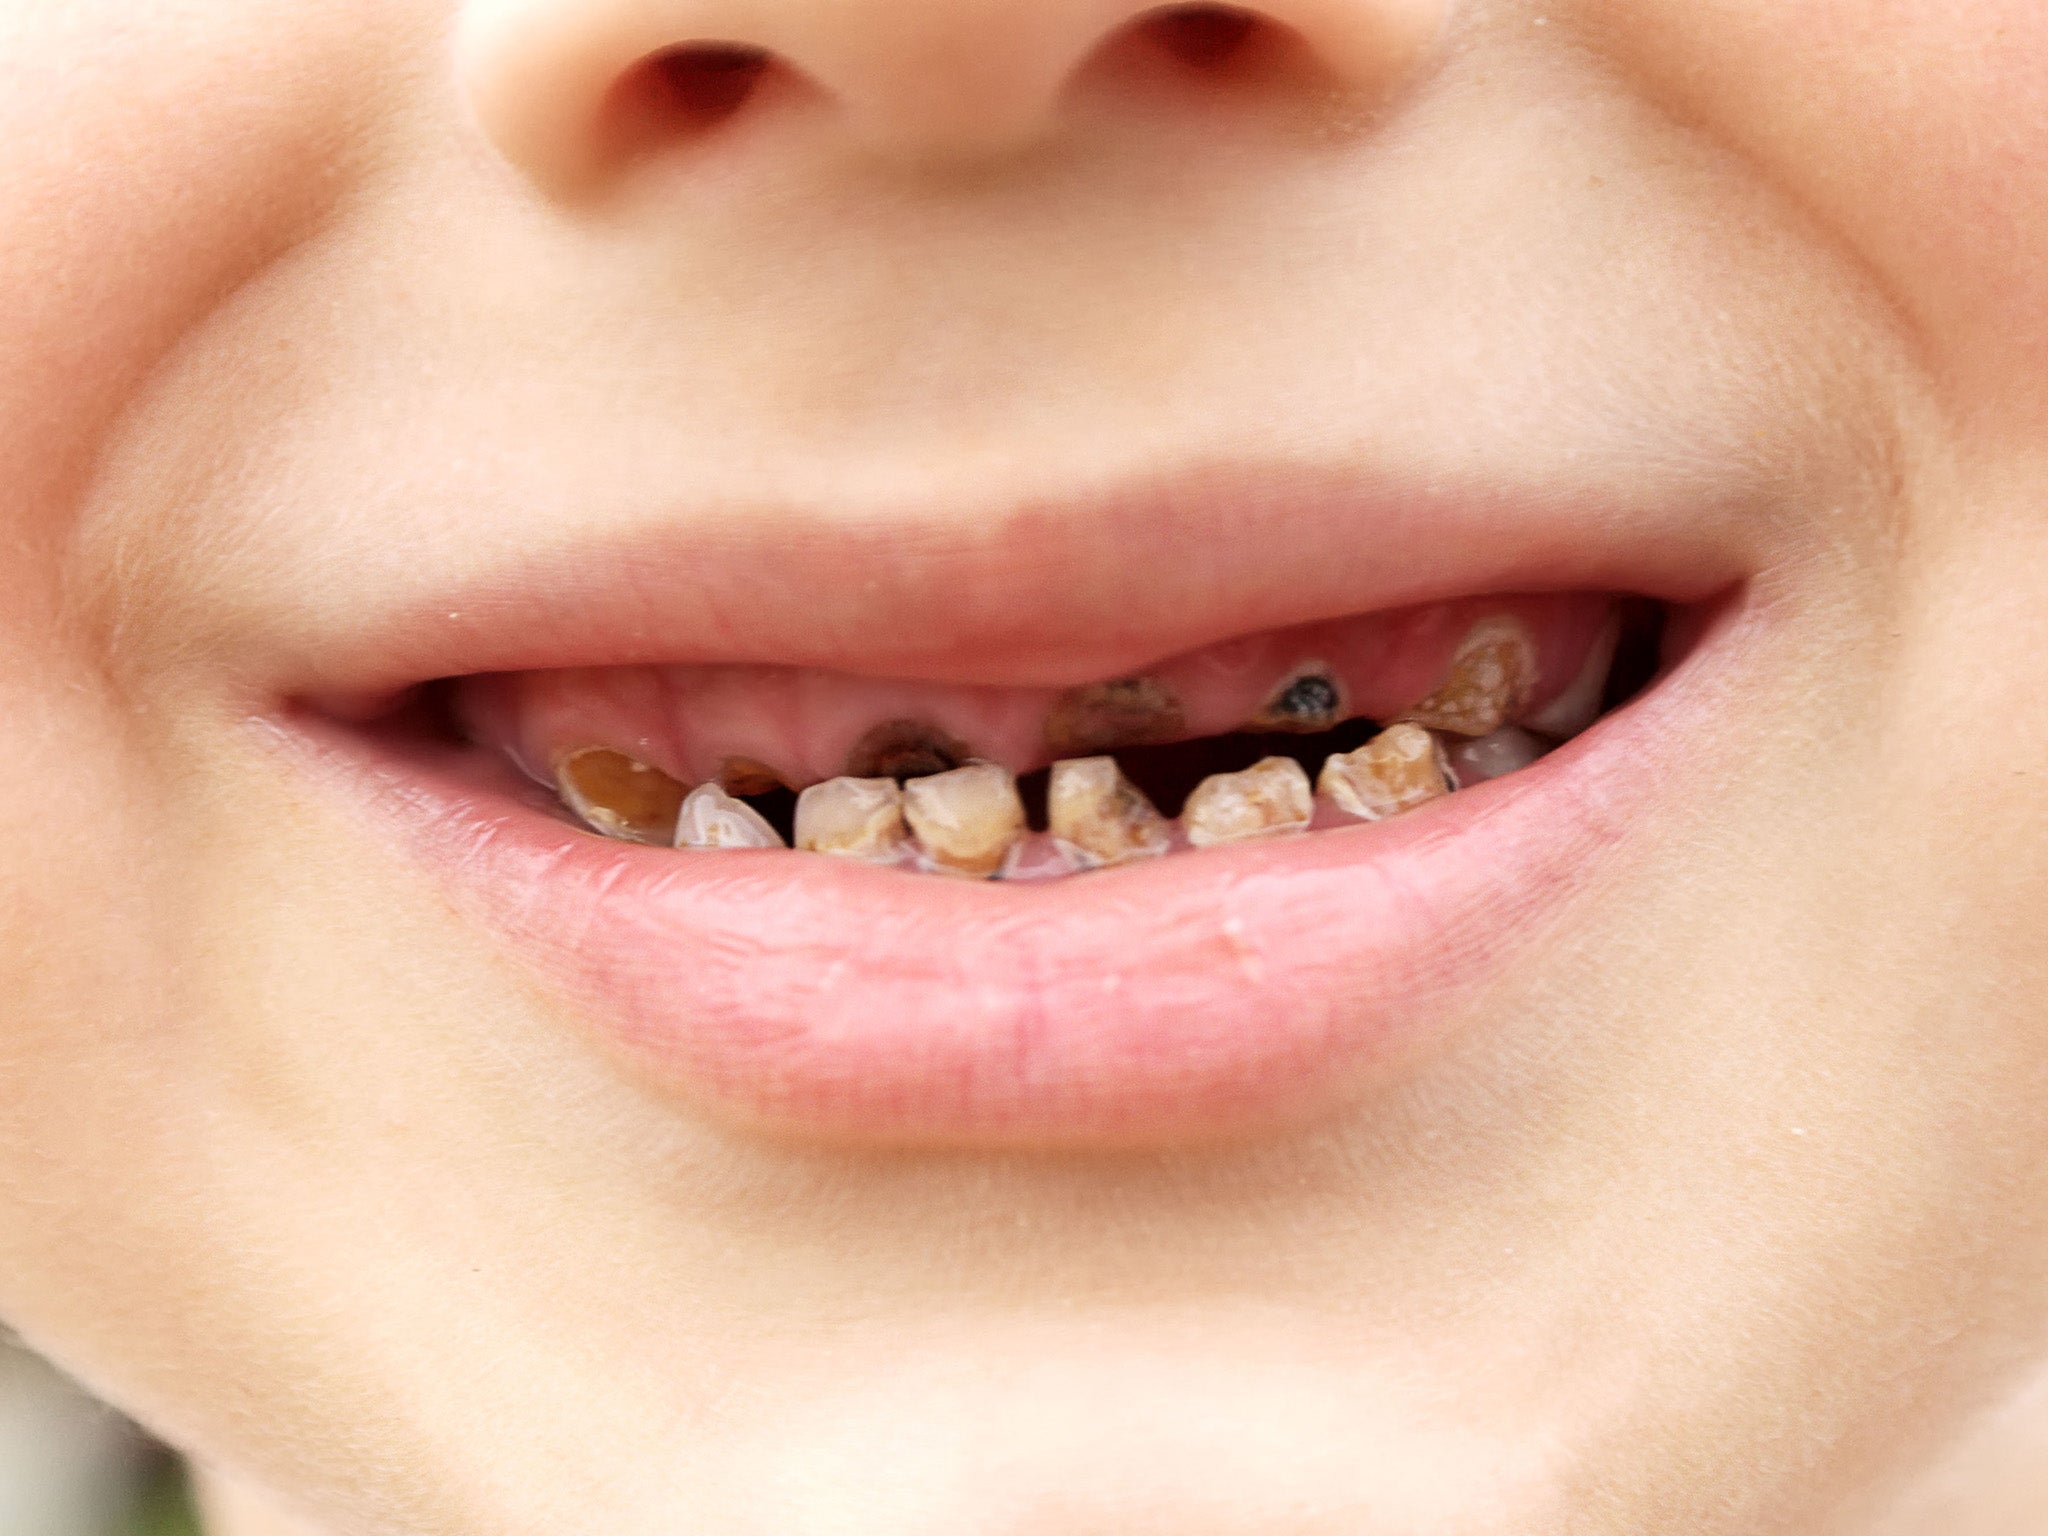 Soaring rates of tooth extractions and obesity in children have been linked to sugar